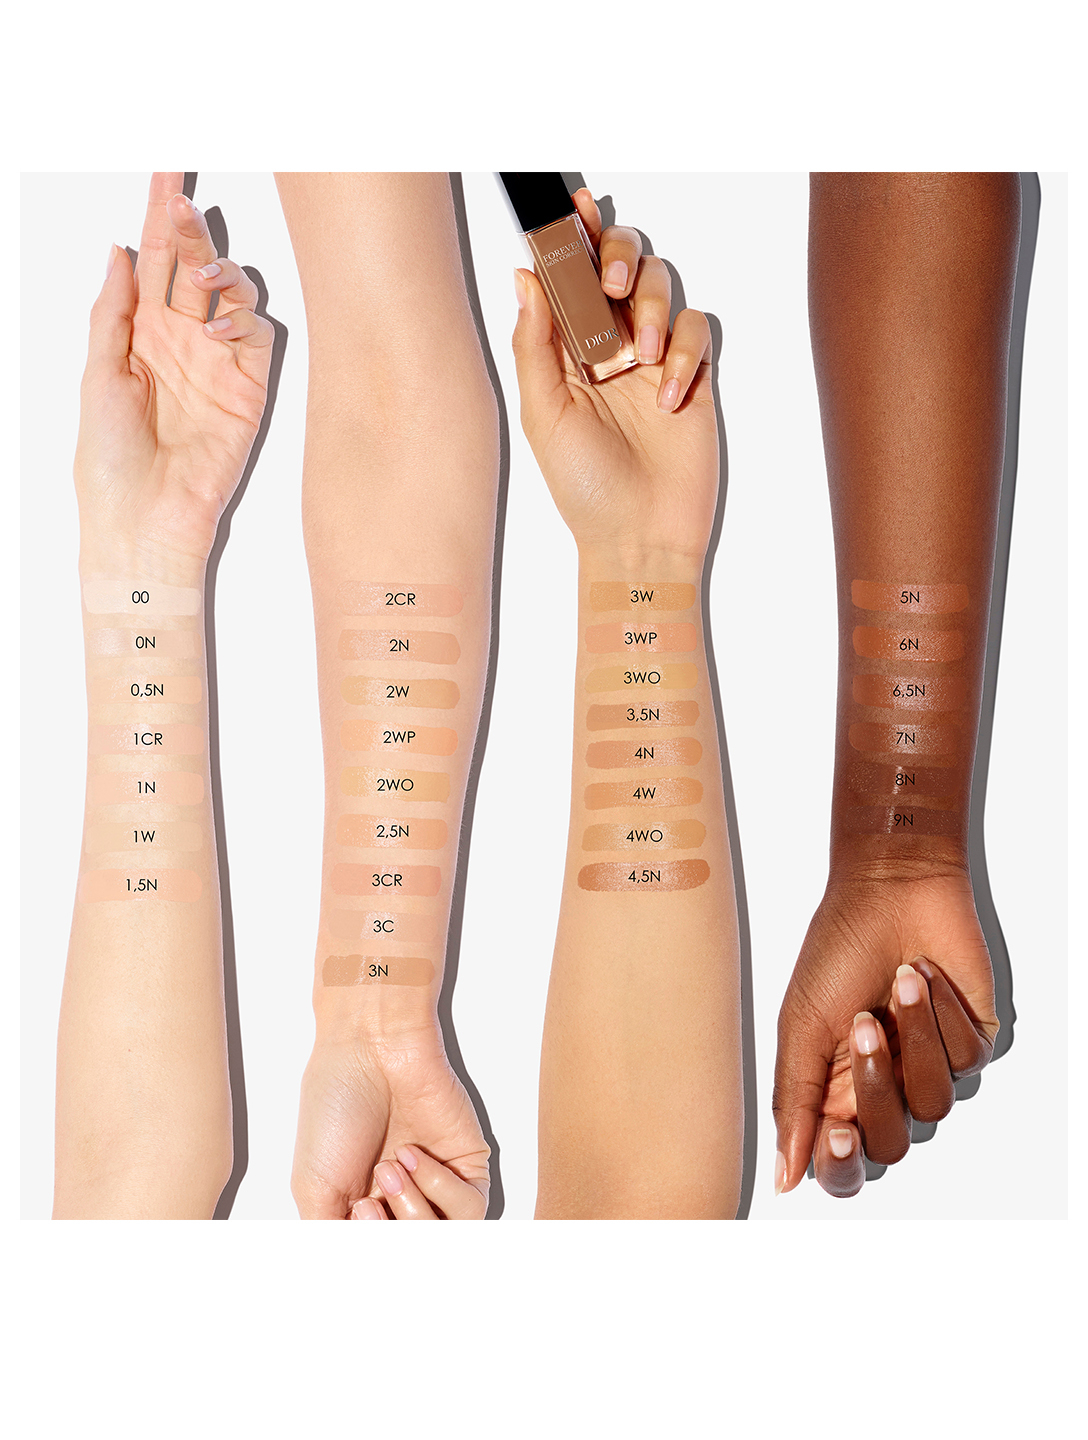 FOREVER SKIN CORRECT, Full-coverage concealer from Dior / 2 WO Warm Olive